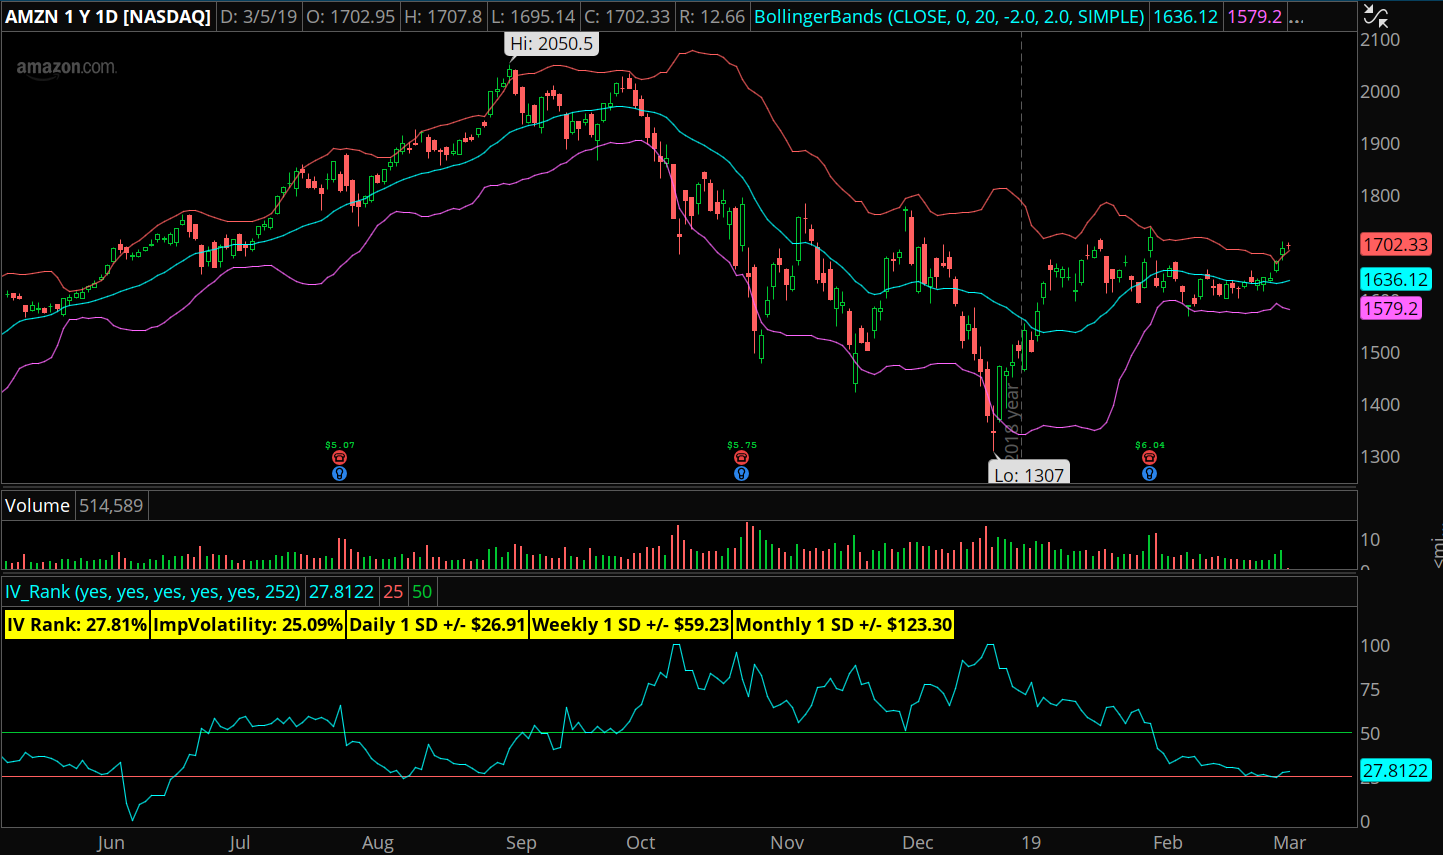 $AMZN chart on TOS: Bollinger Bands, Implied Volatility and IV Rank